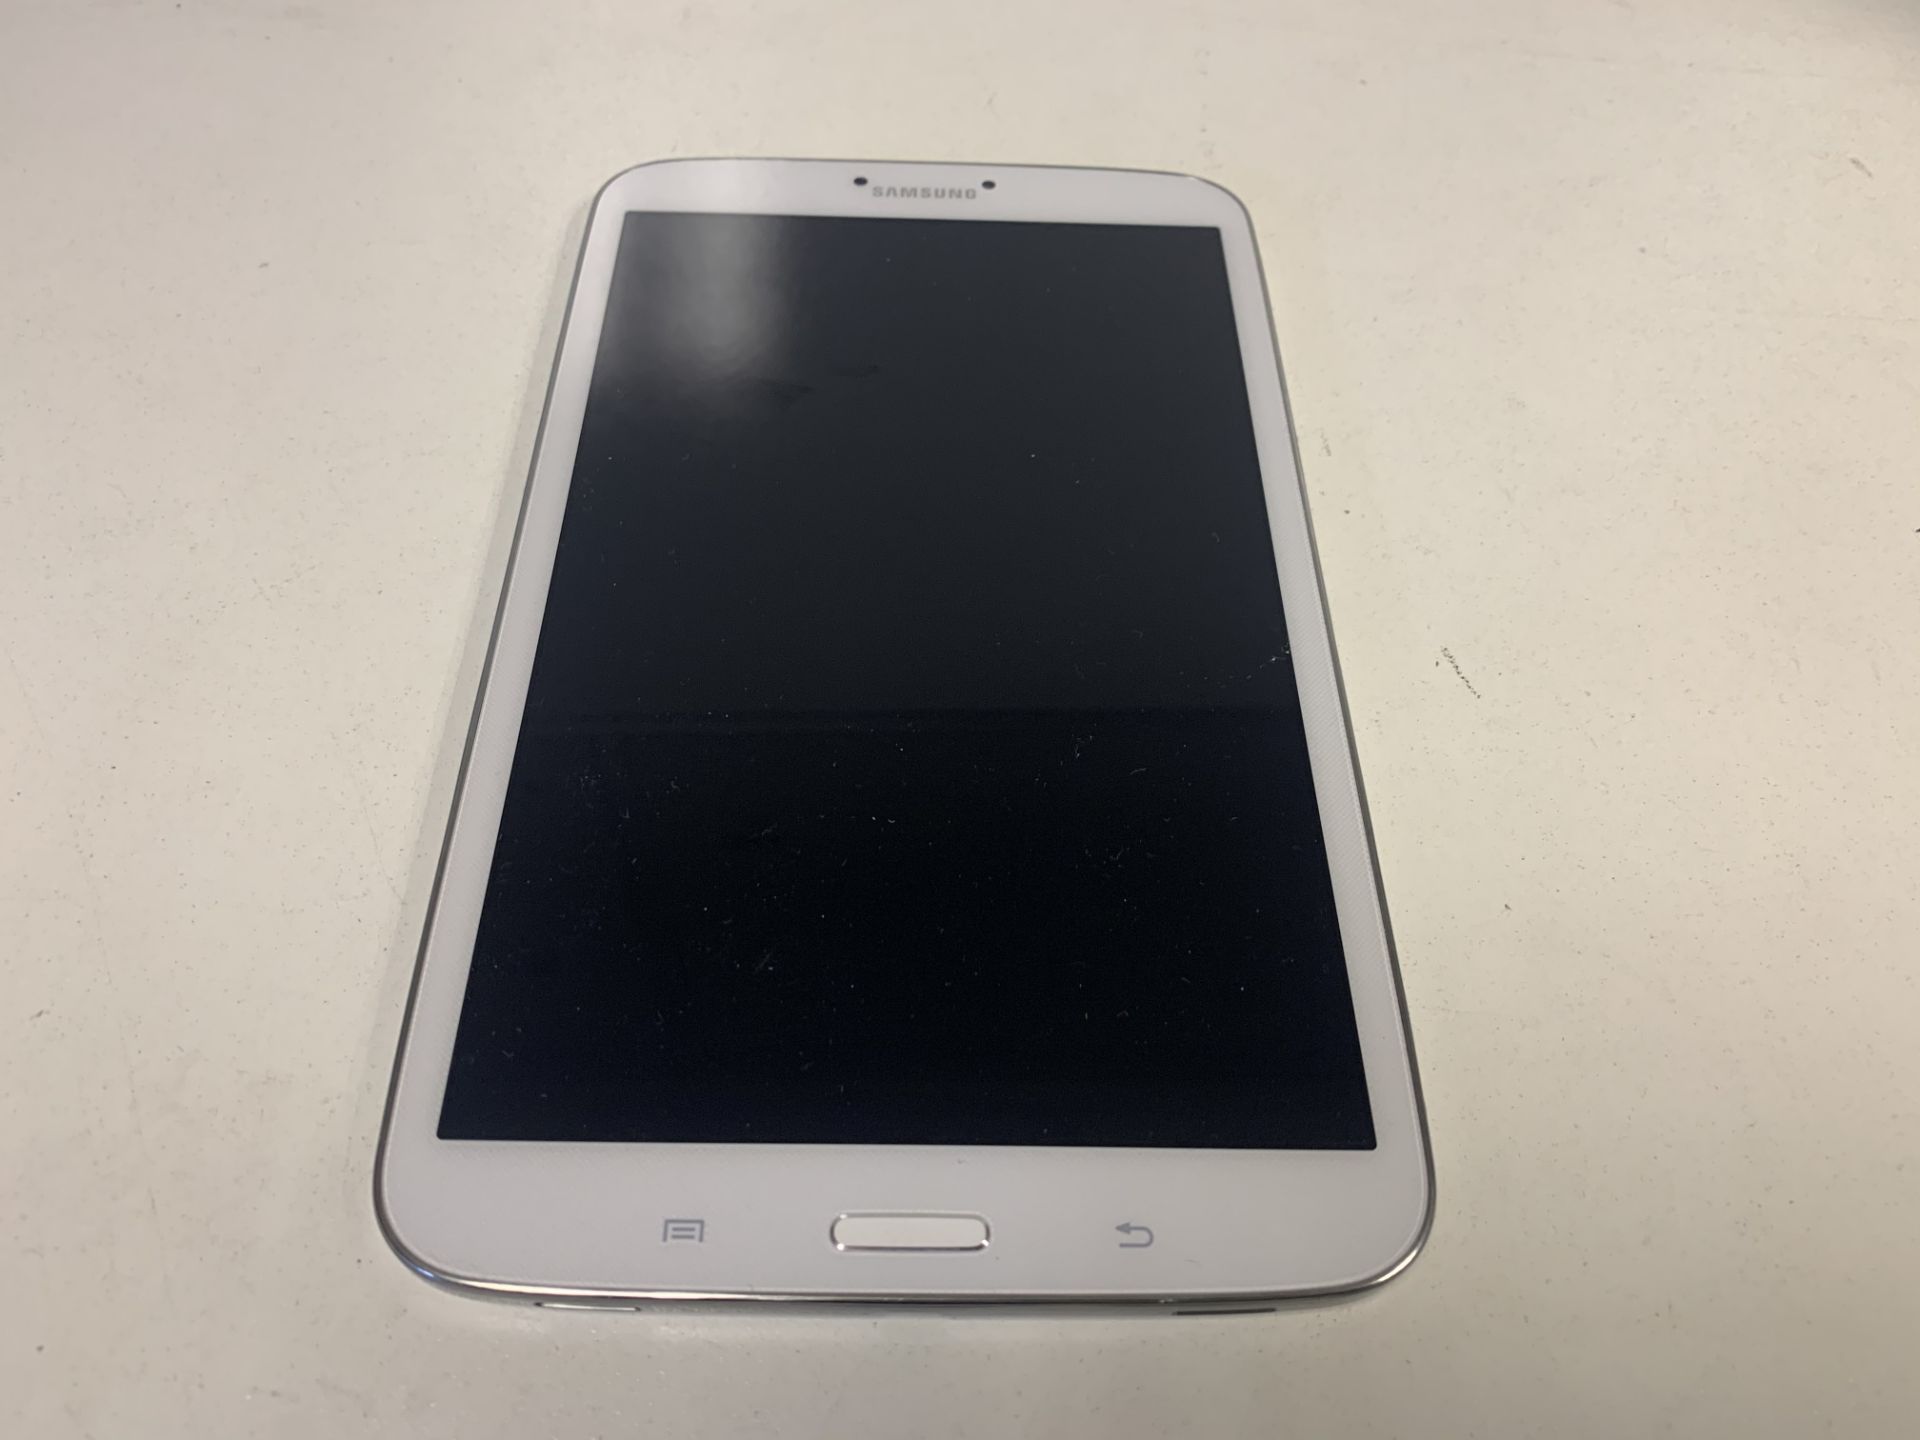 SAMSUNG E TAB 3 TABLET, IN RETAIL MODE, 16GB STORAGE WITH CHARGER